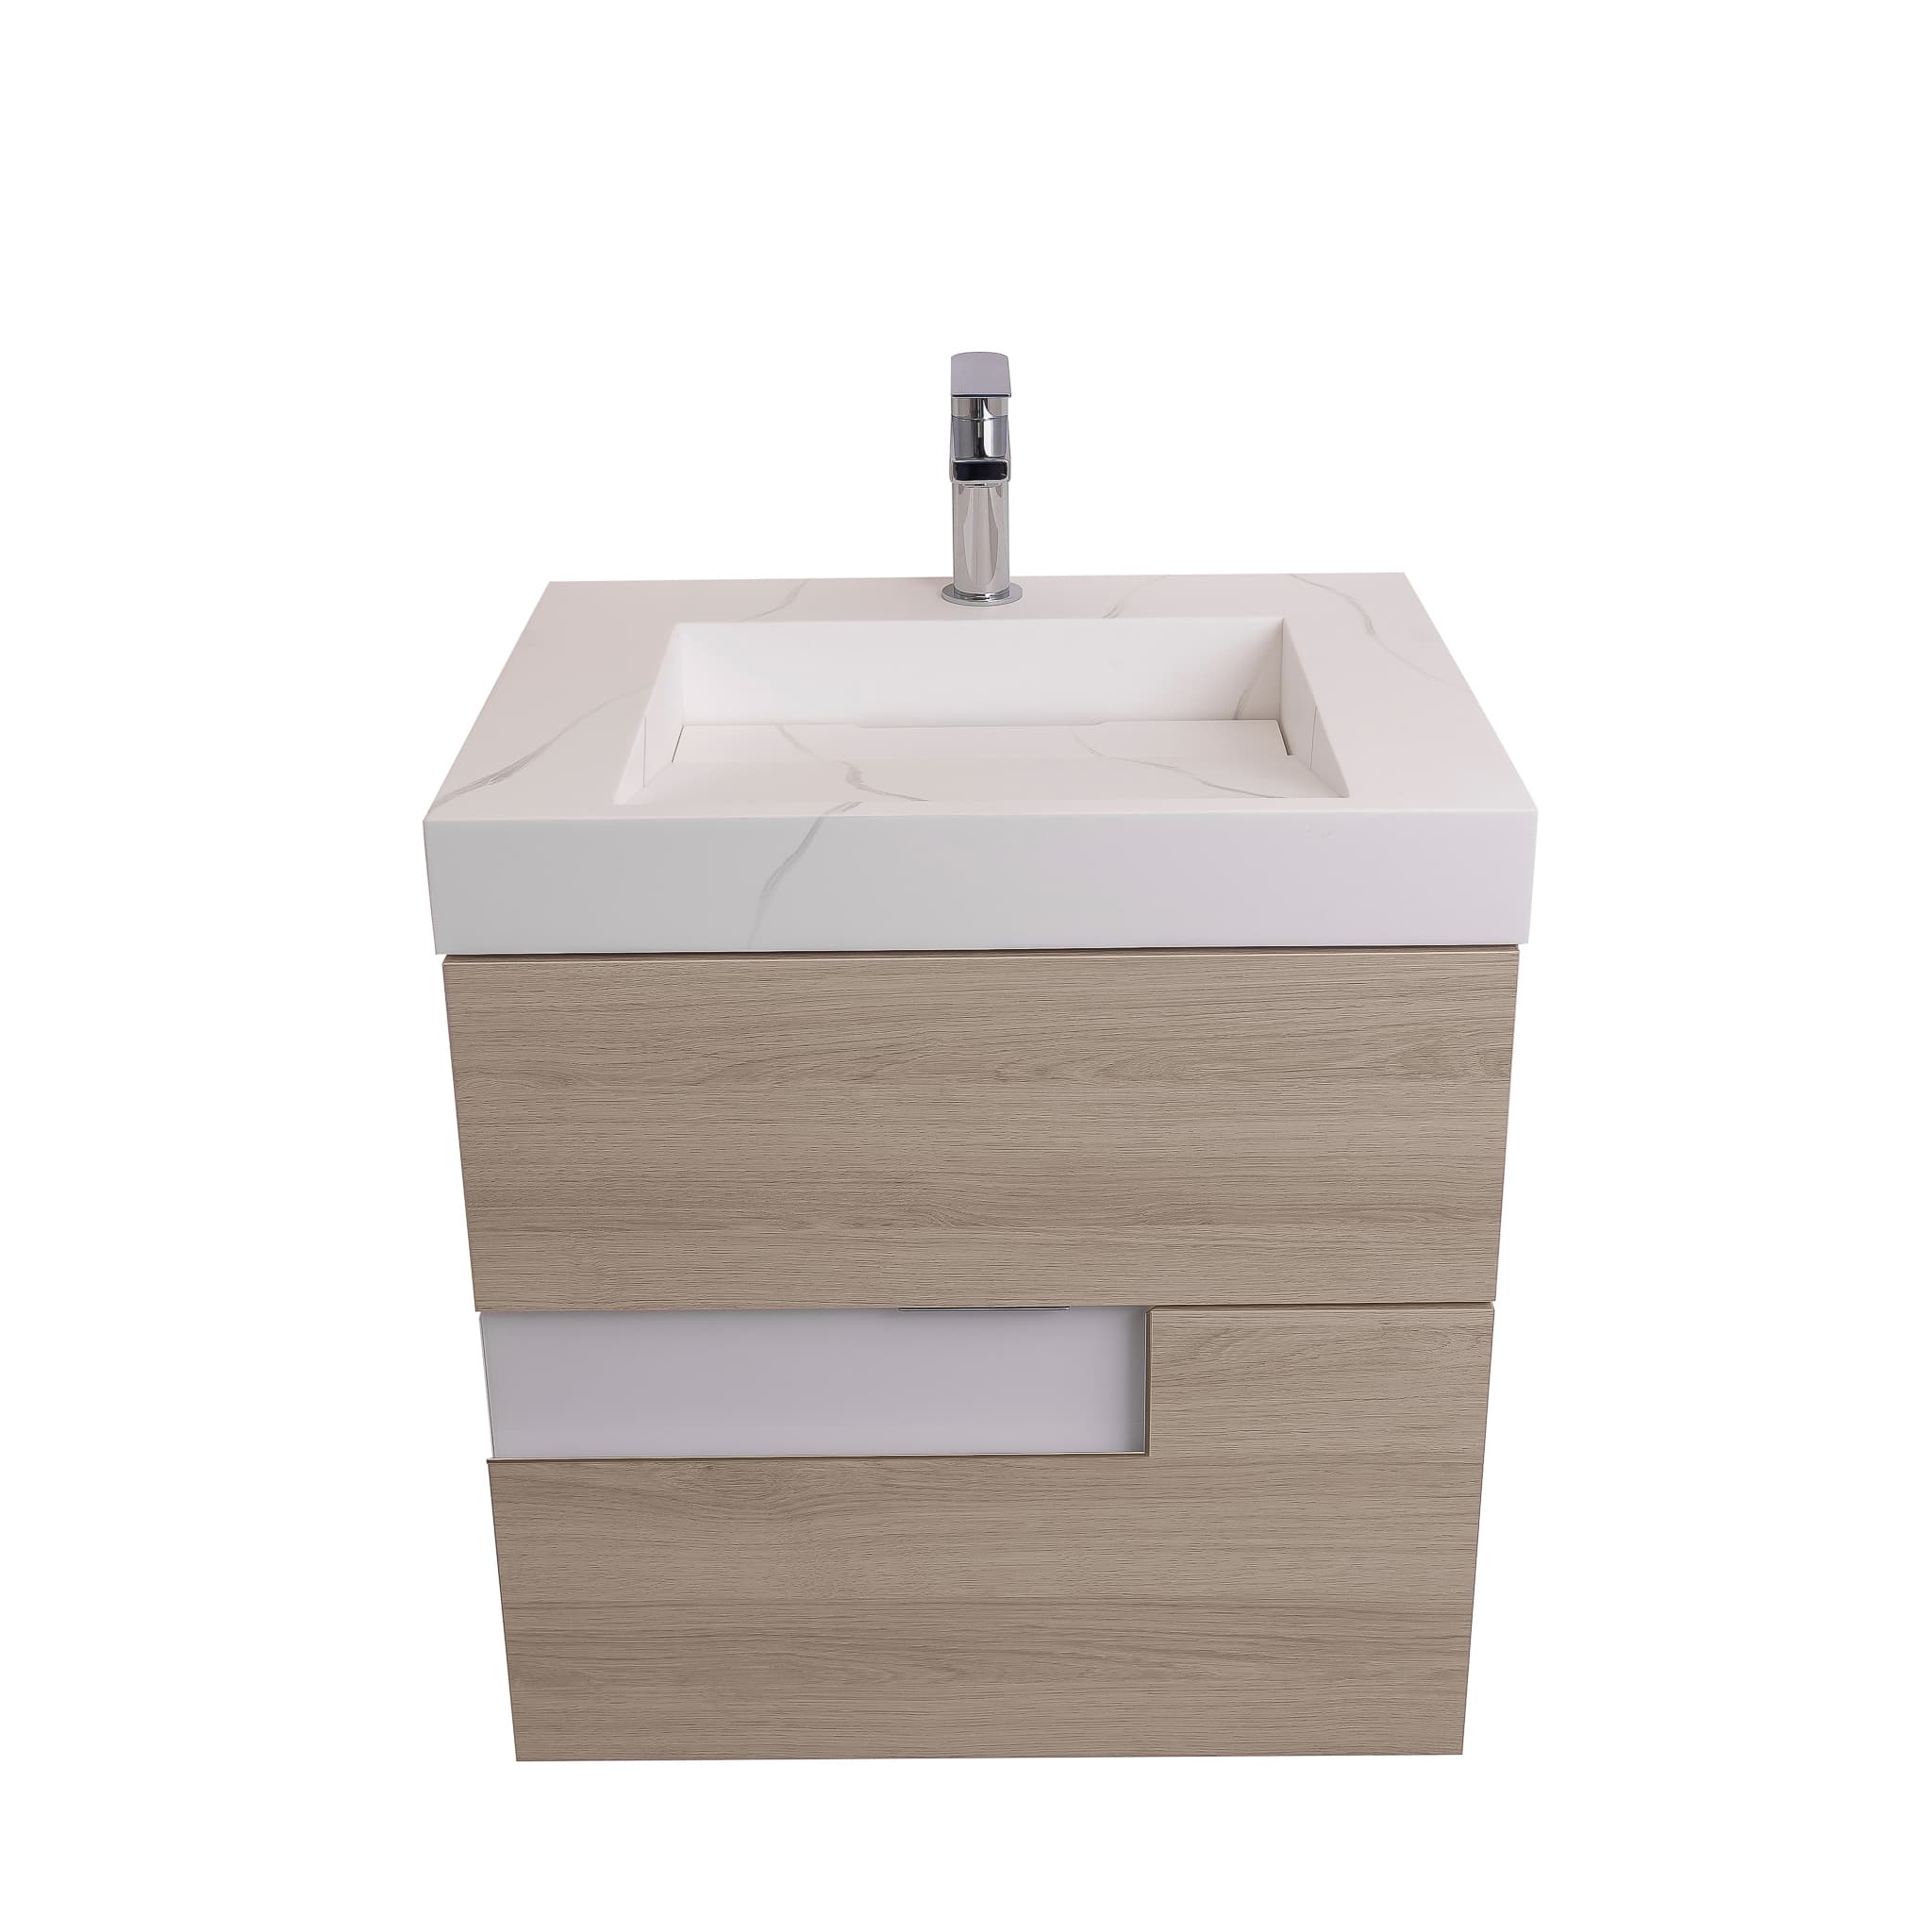 Vision 23.5 Natural Light Wood Cabinet, Solid Surface Matte White Top Carrara Infinity Sink, Wall Mounted Modern Vanity Set